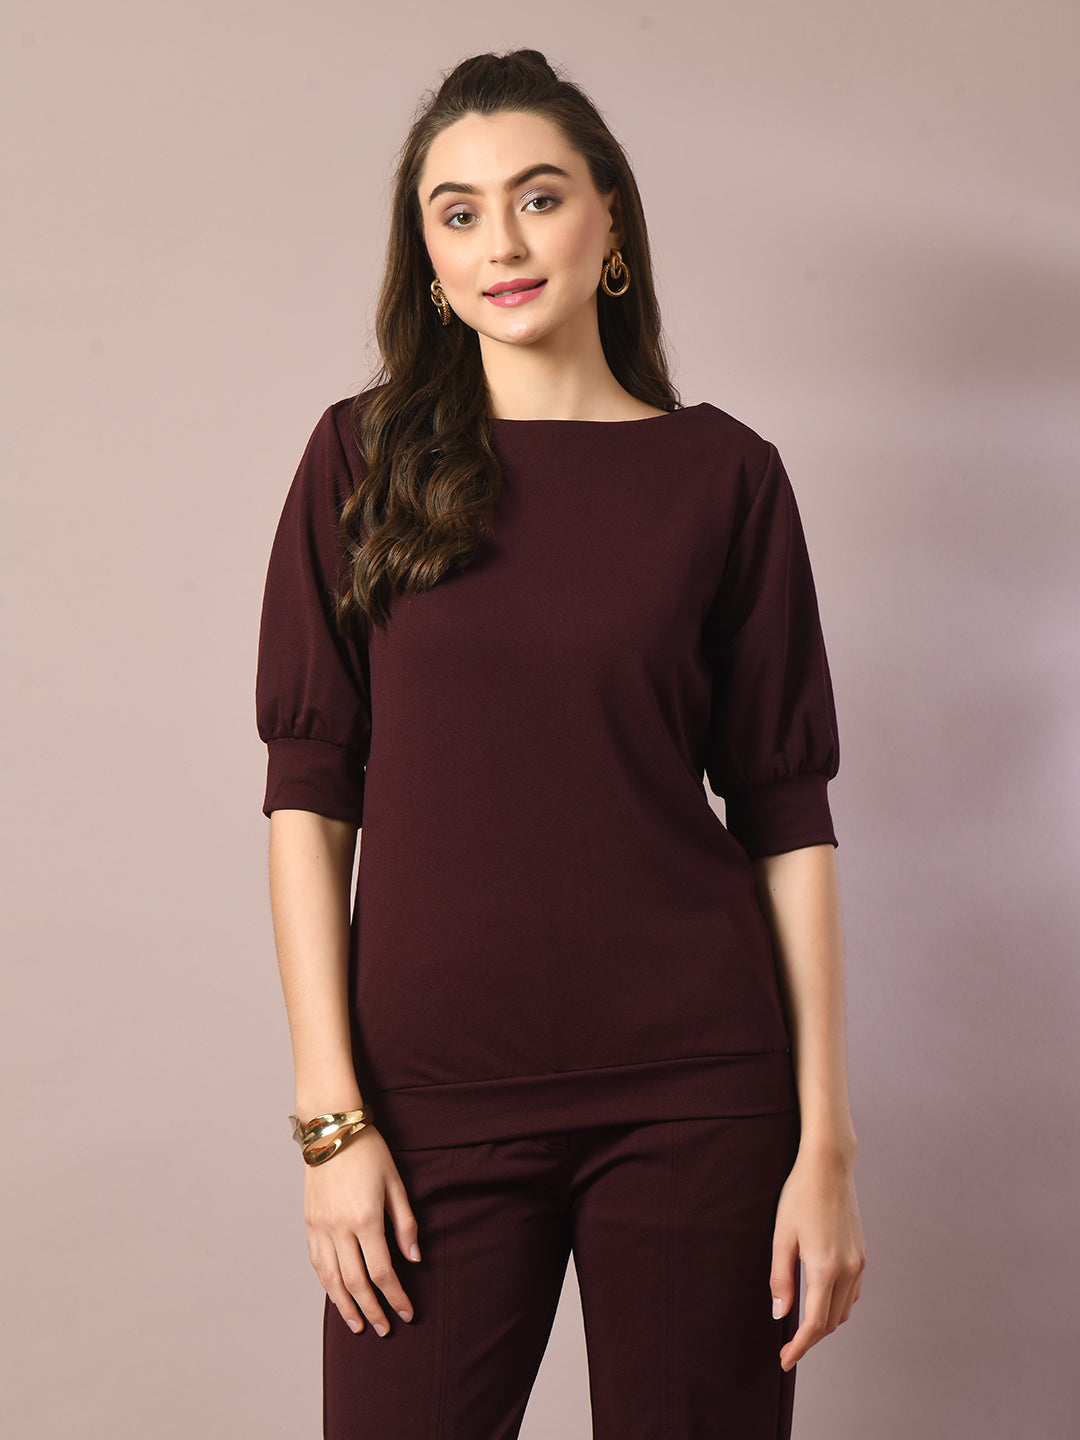 Women's  Coffee Brown Solid Boat Neck Party Top  - Myshka